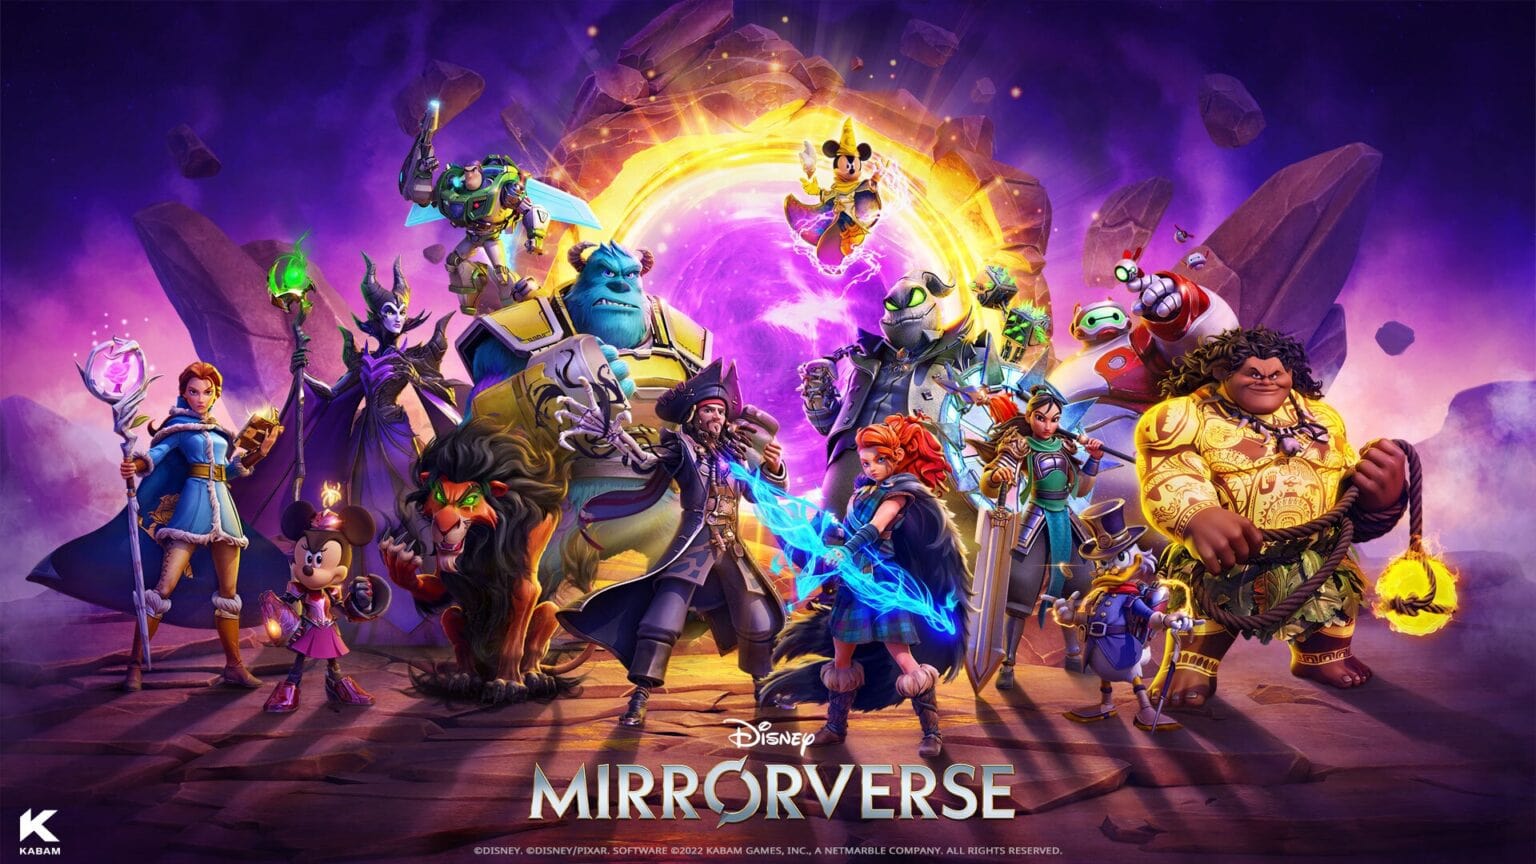 'Disney Mirrorverse' offers a whole new world of violence to iPhone gamers